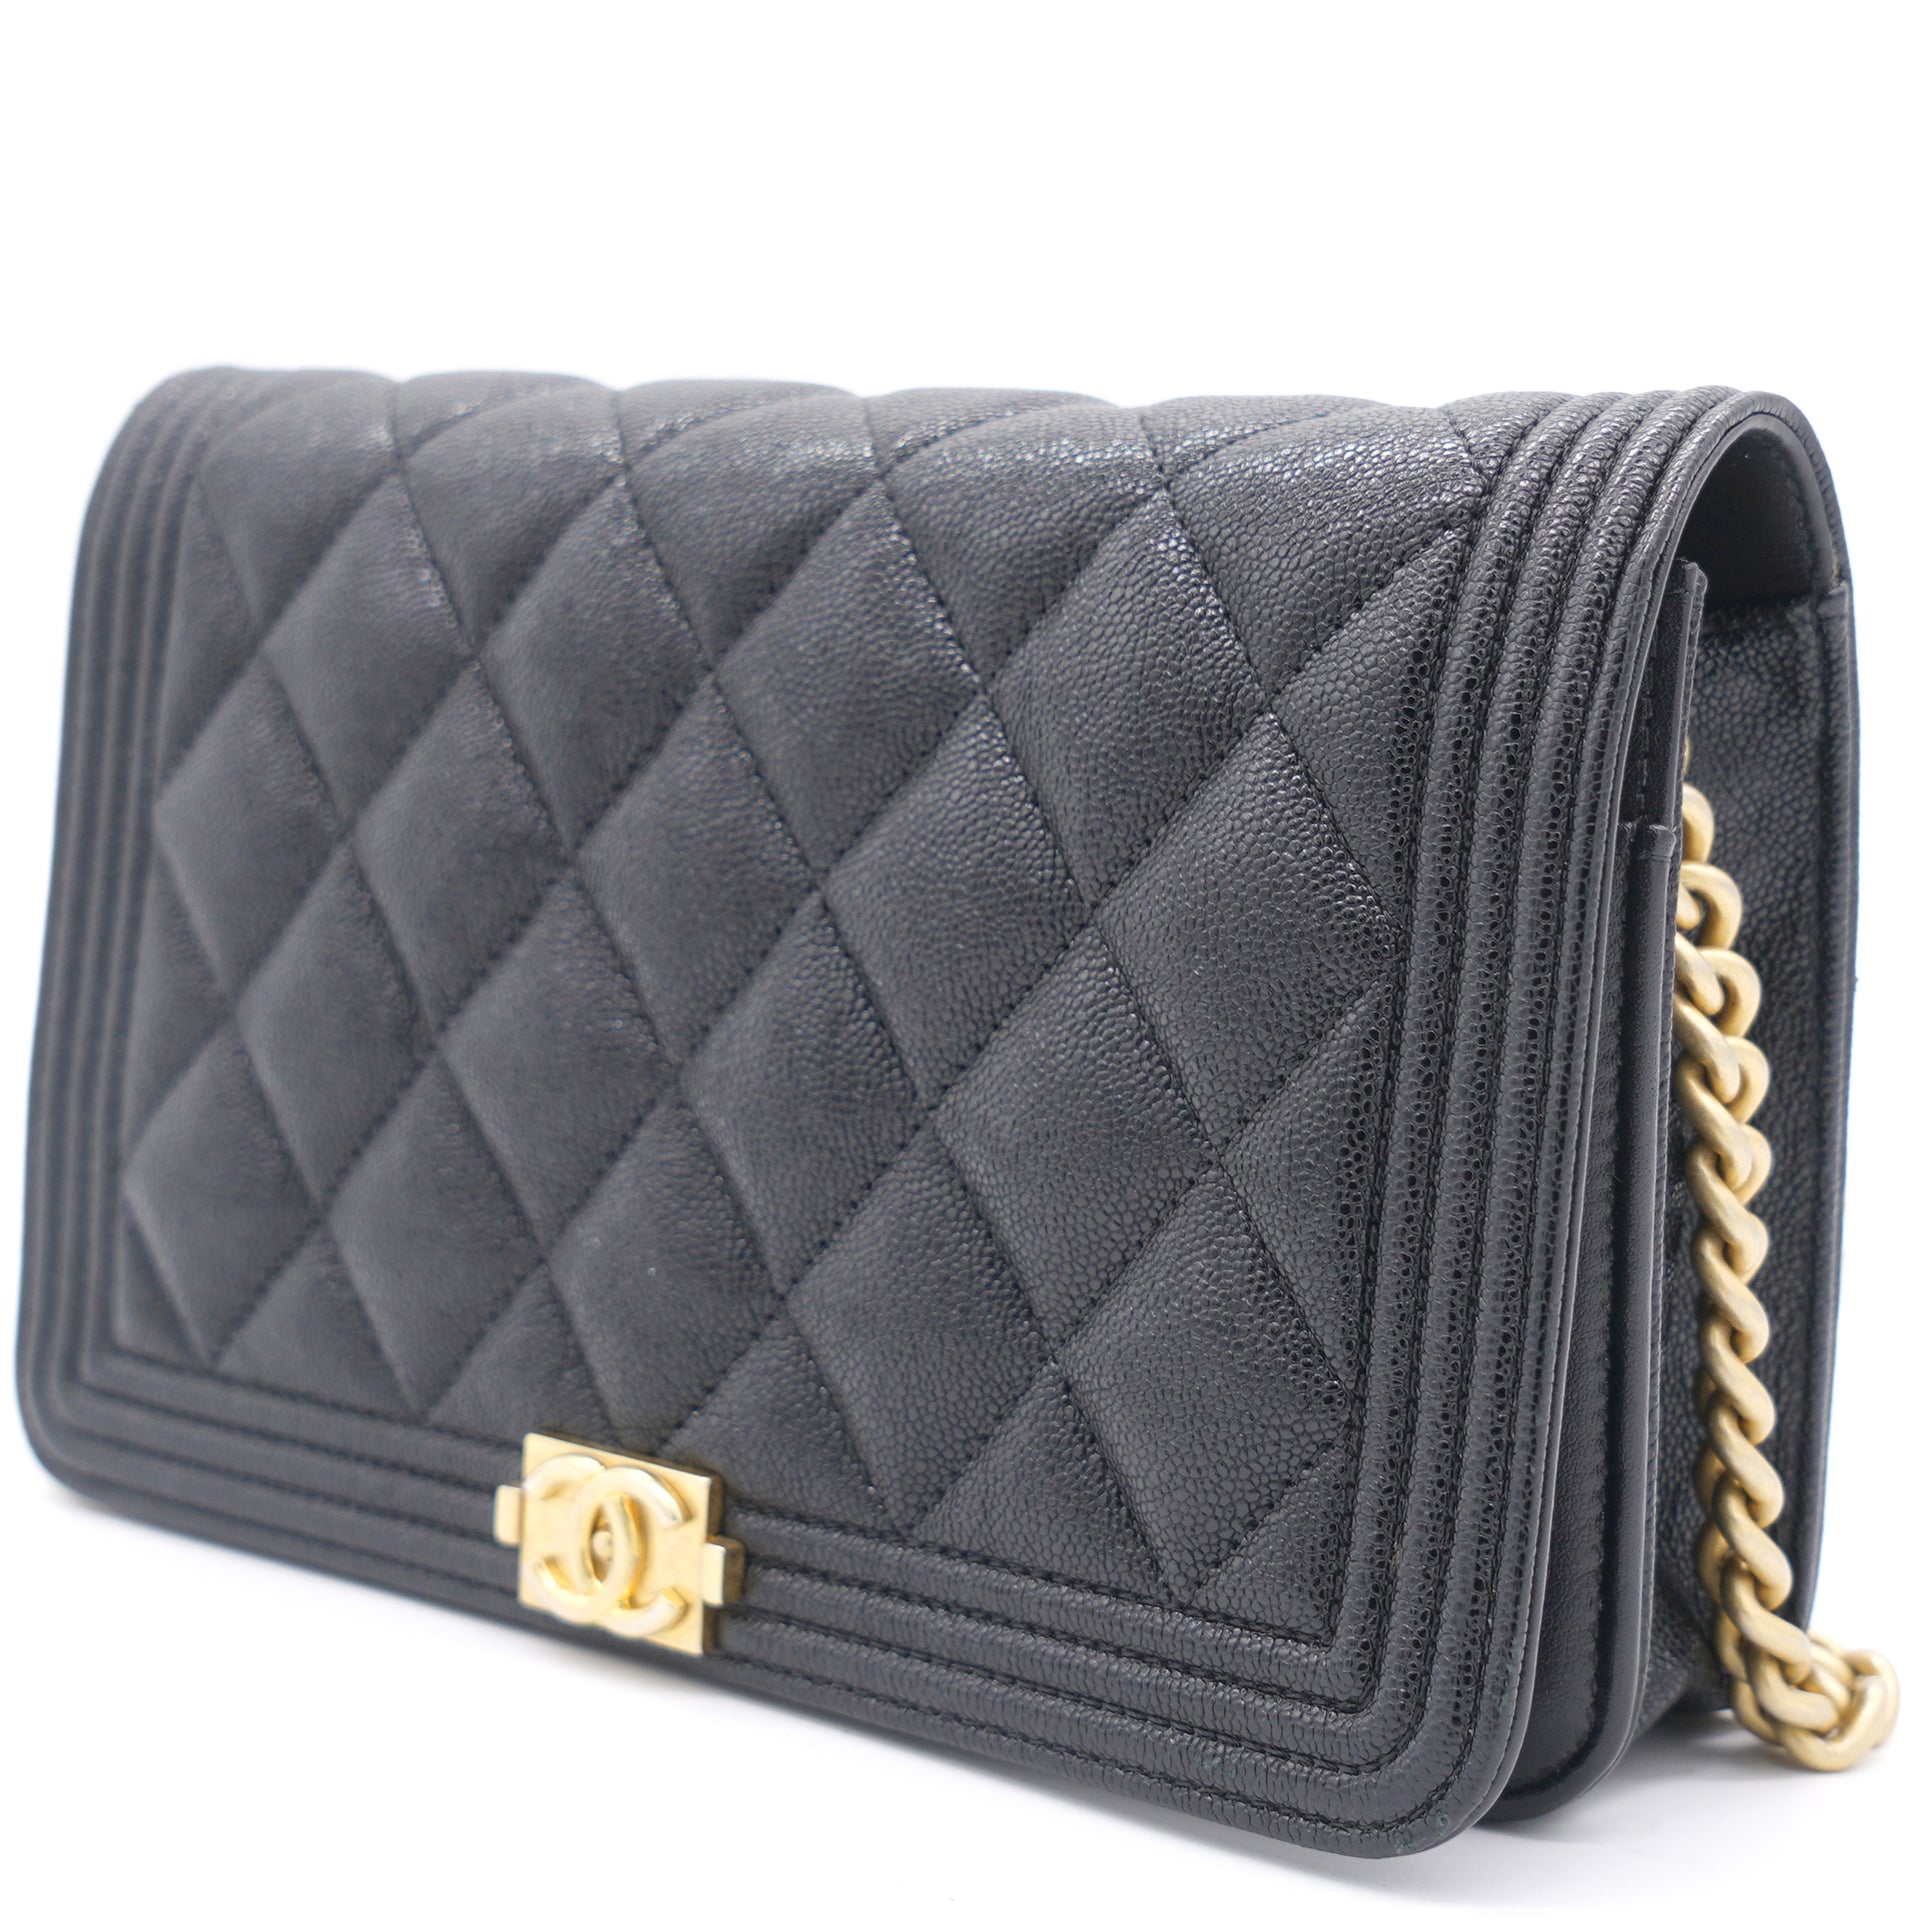 Boy Chanel Quilted Wallets